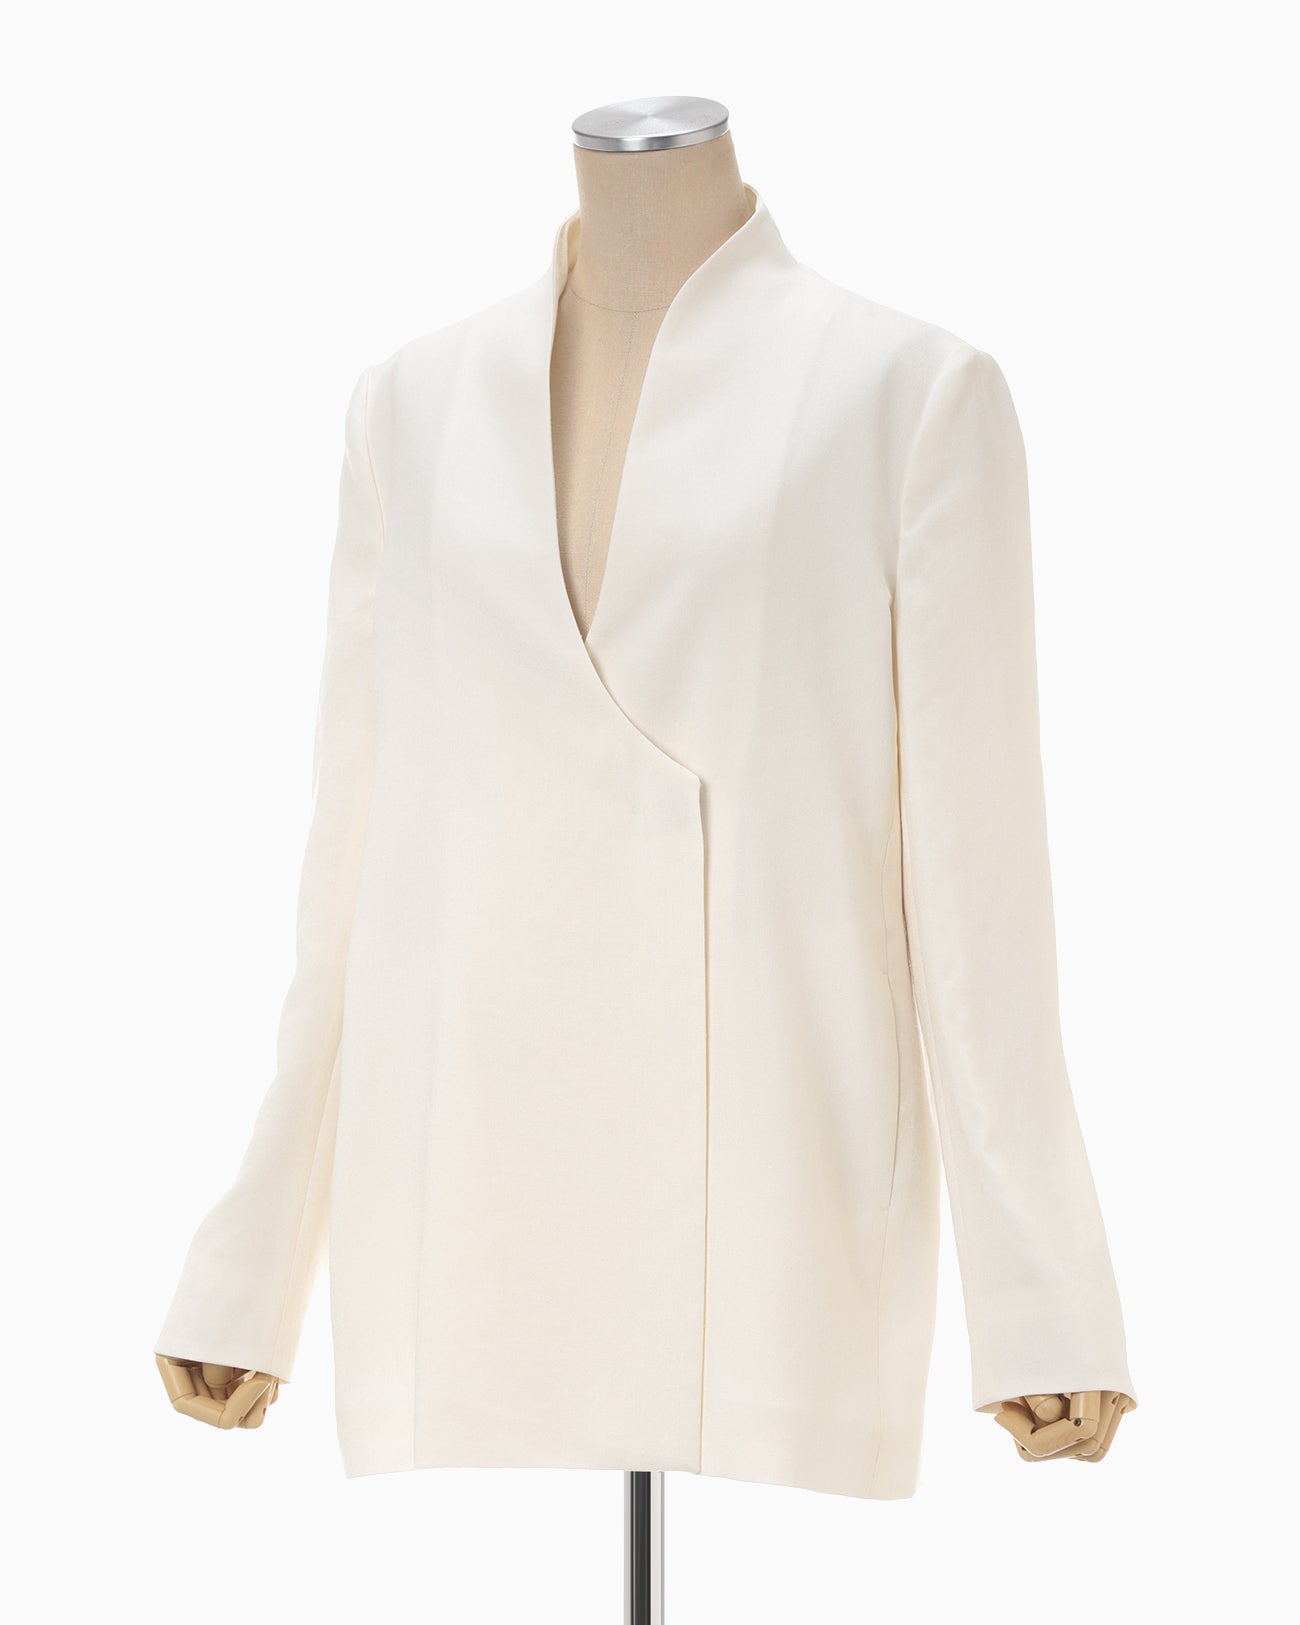 Linen Touch Triacetate Collarless Double Breasted Jacket - white